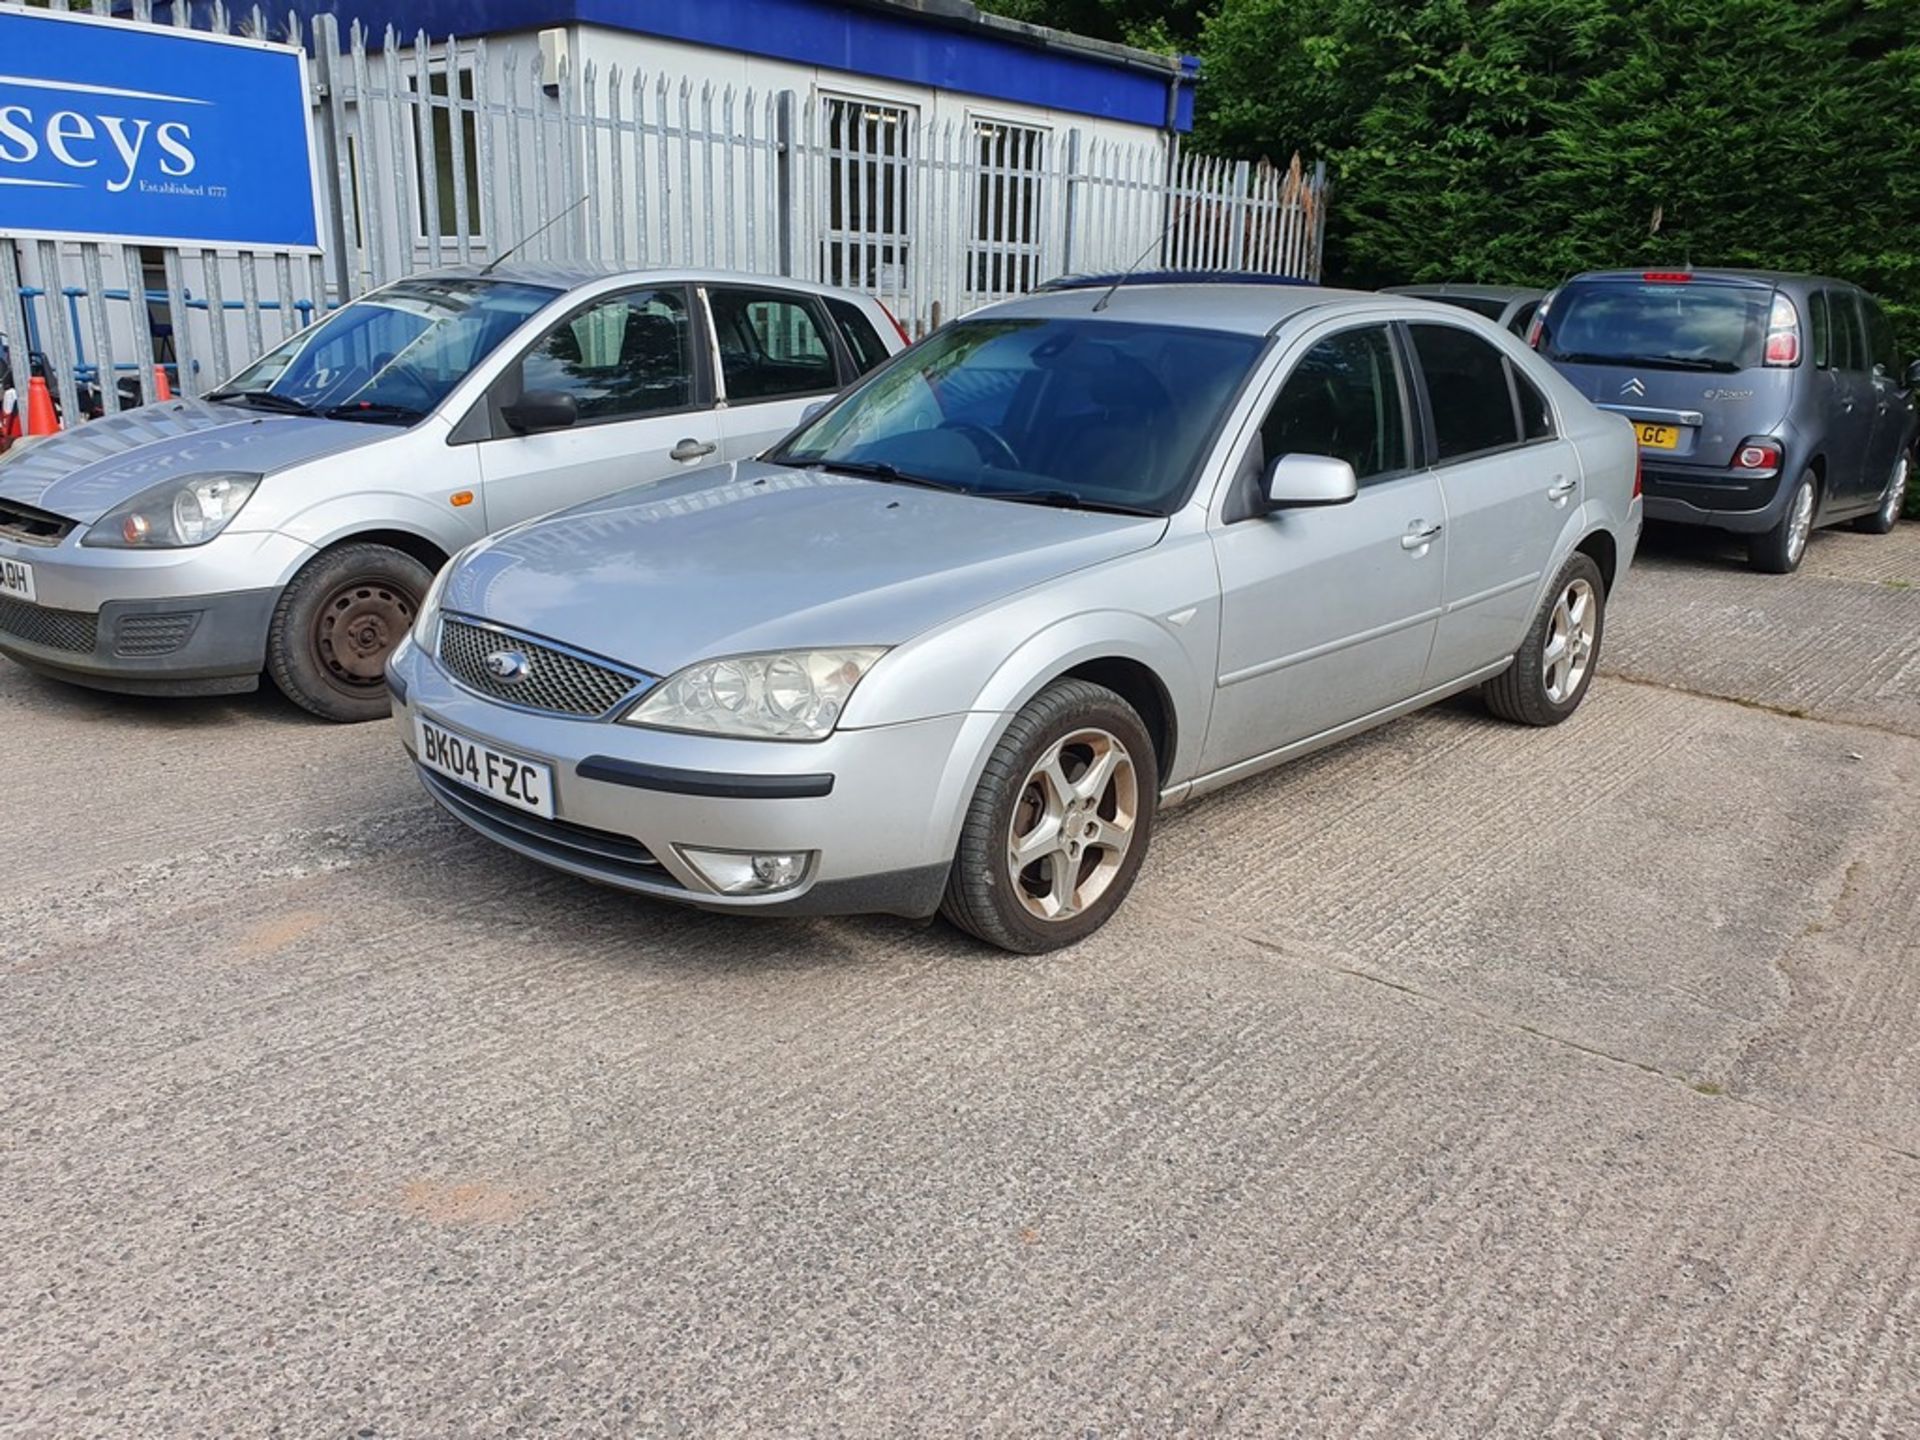 04/04 FORD MONDEO GHIA TDCI - 1998cc 5dr Hatchback (Silver, 190k) - Image 3 of 16